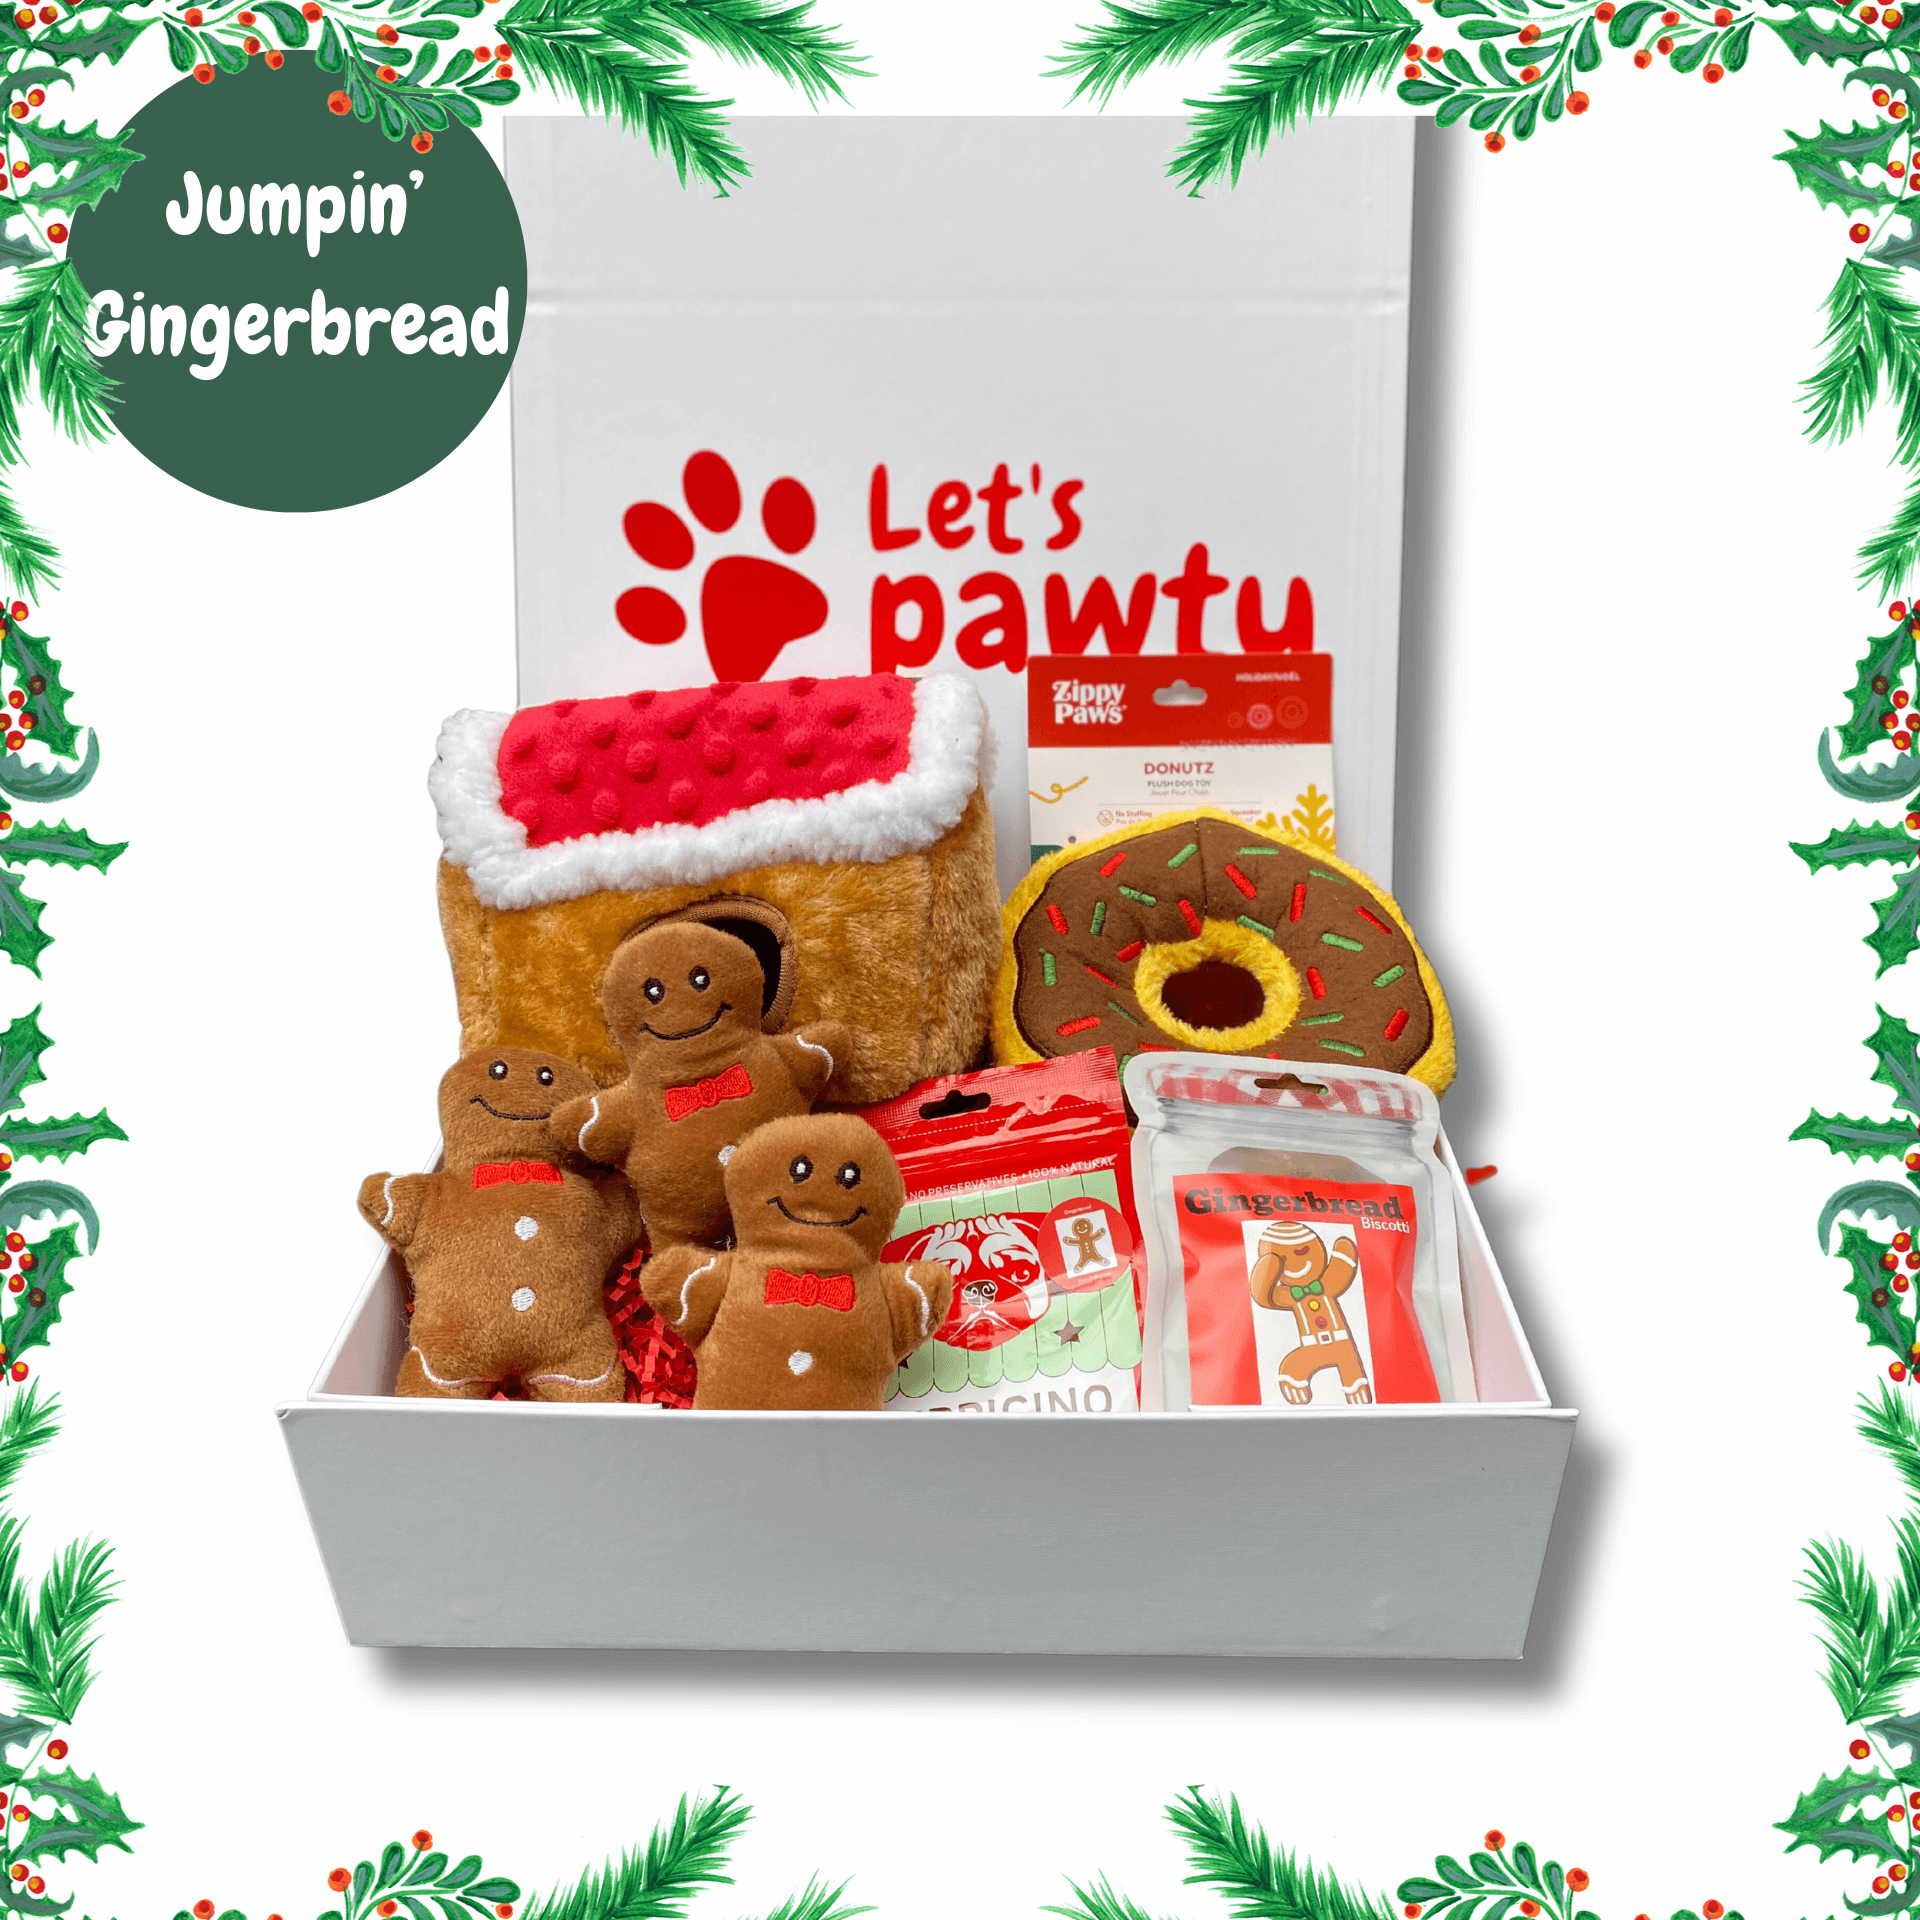 Christmas themed dog gift box, gingerbread, interactive dog toy, dog treat, let's pawty, personalised gift box